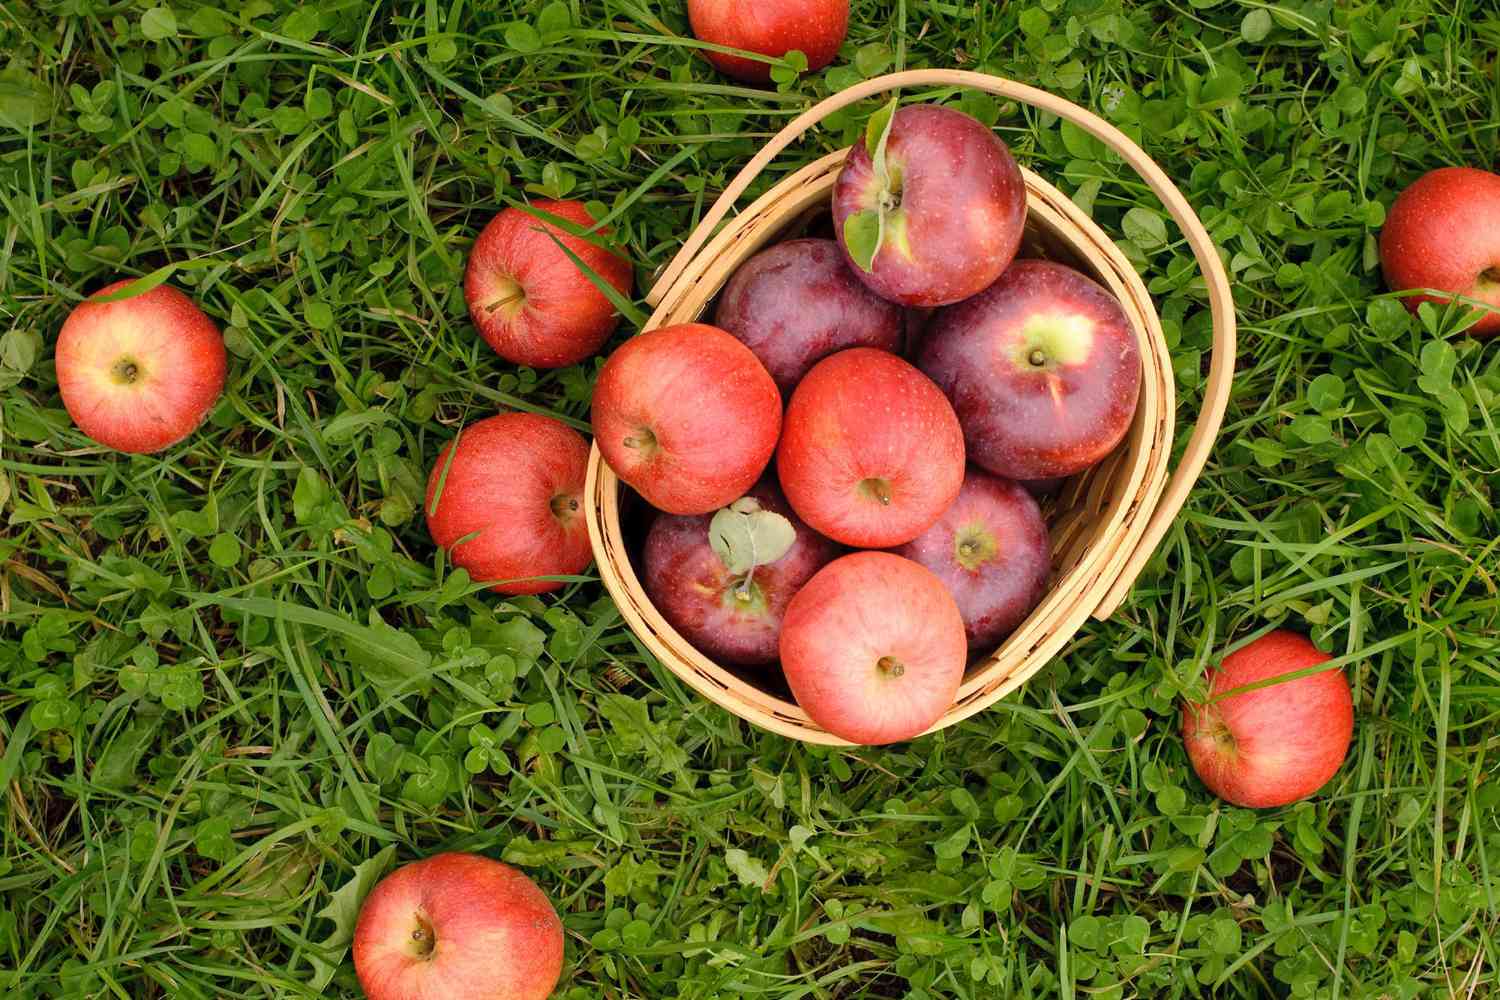 20 Best Apple Orchards in the US According to Yelp